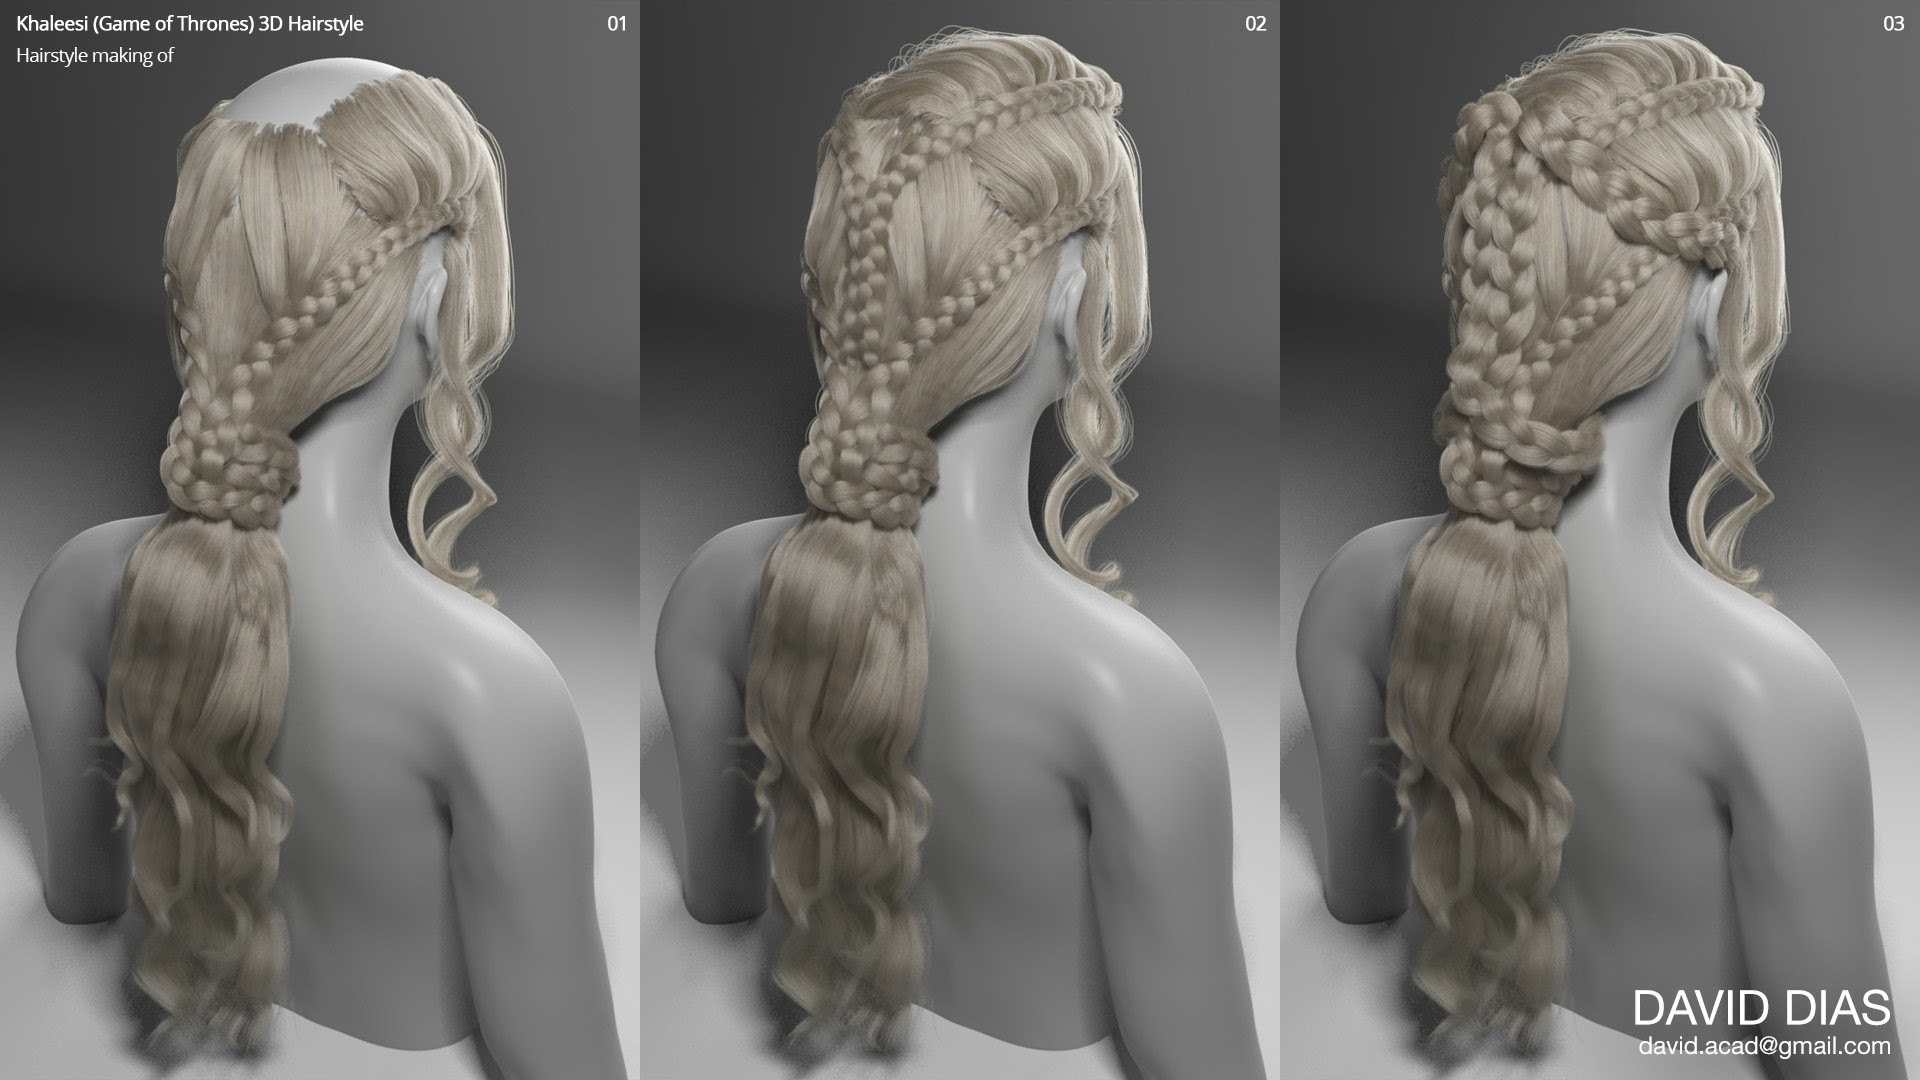 The majority of Daenerys' hairstyles over the years! Which was your  favorite? : r/DaenerysWinsTheThrone